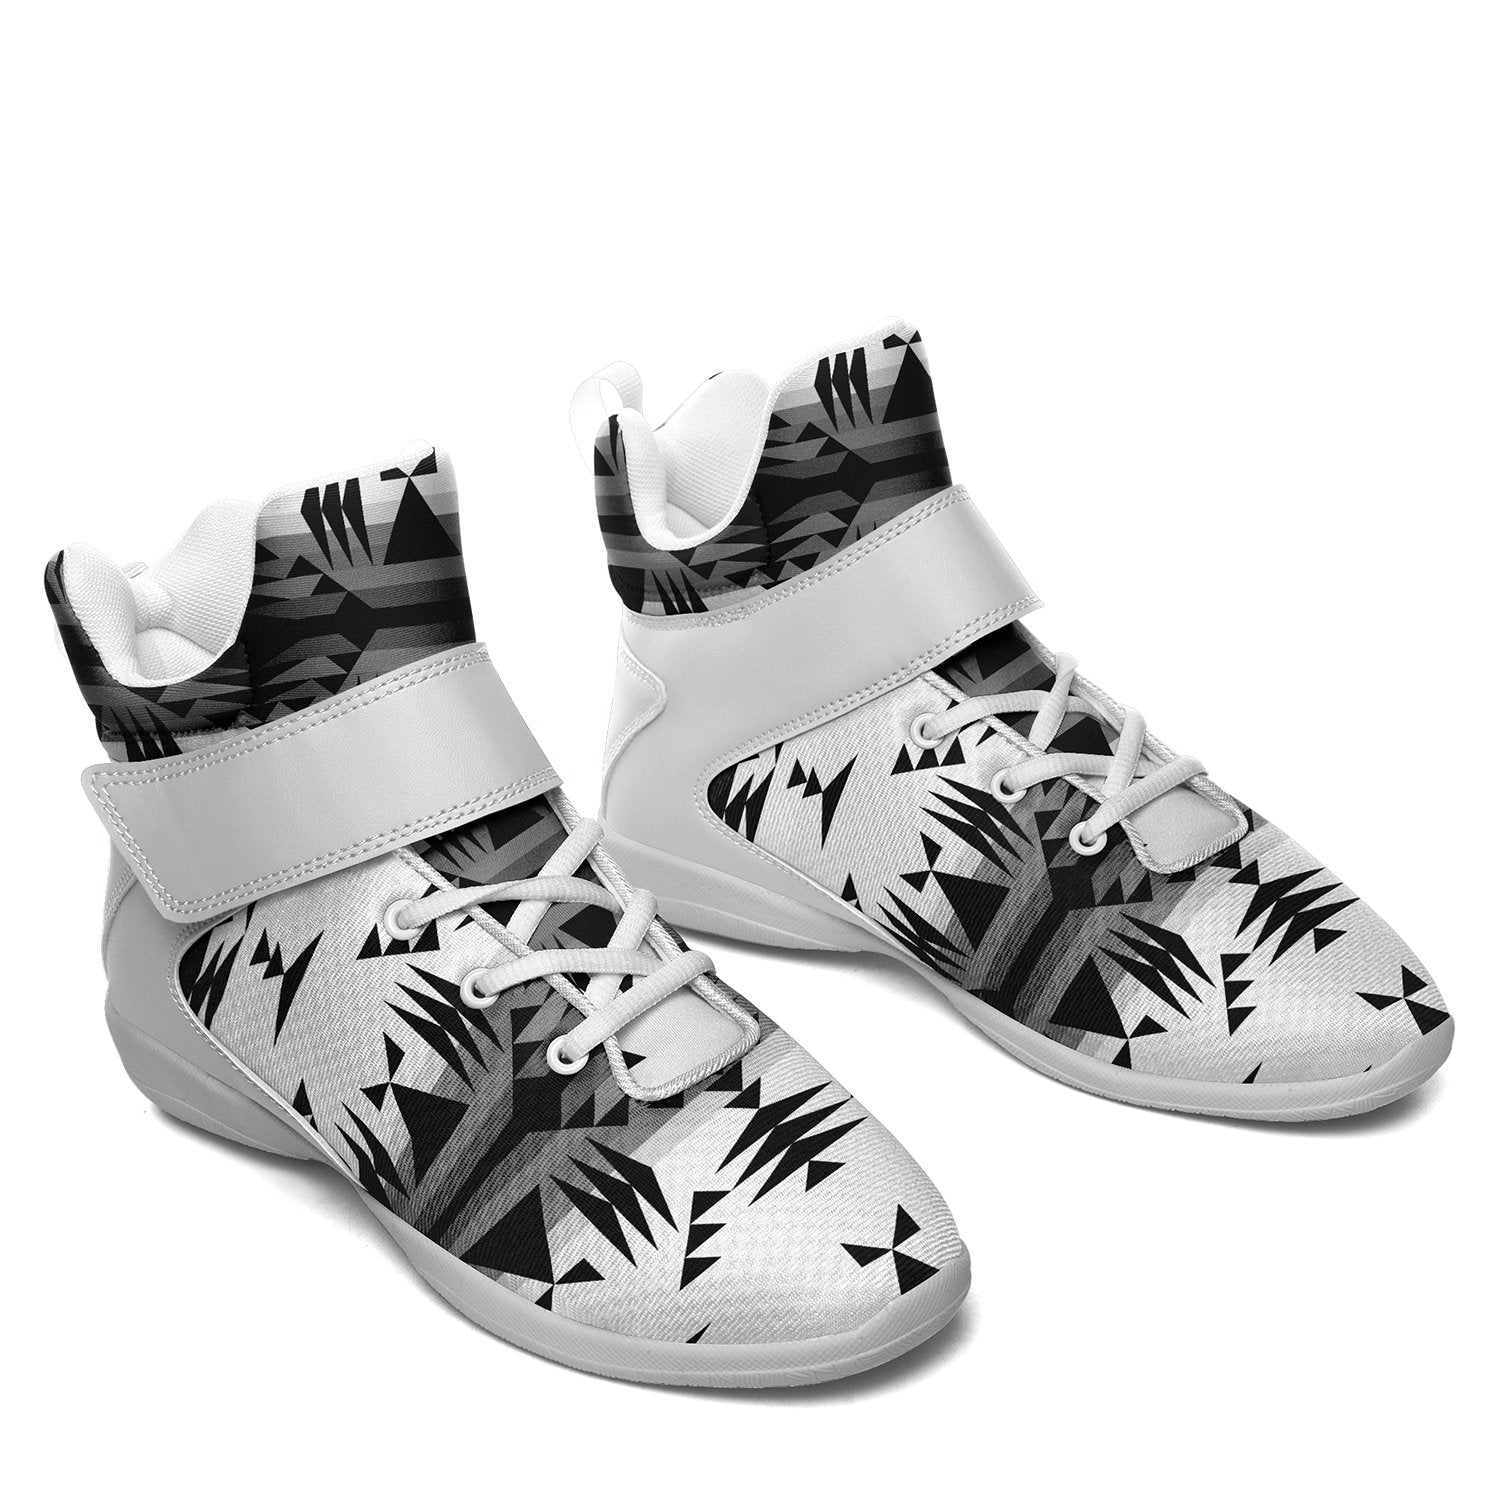 Between the Mountains White and Black Ipottaa Basketball / Sport High Top Shoes - White Sole 49 Dzine 